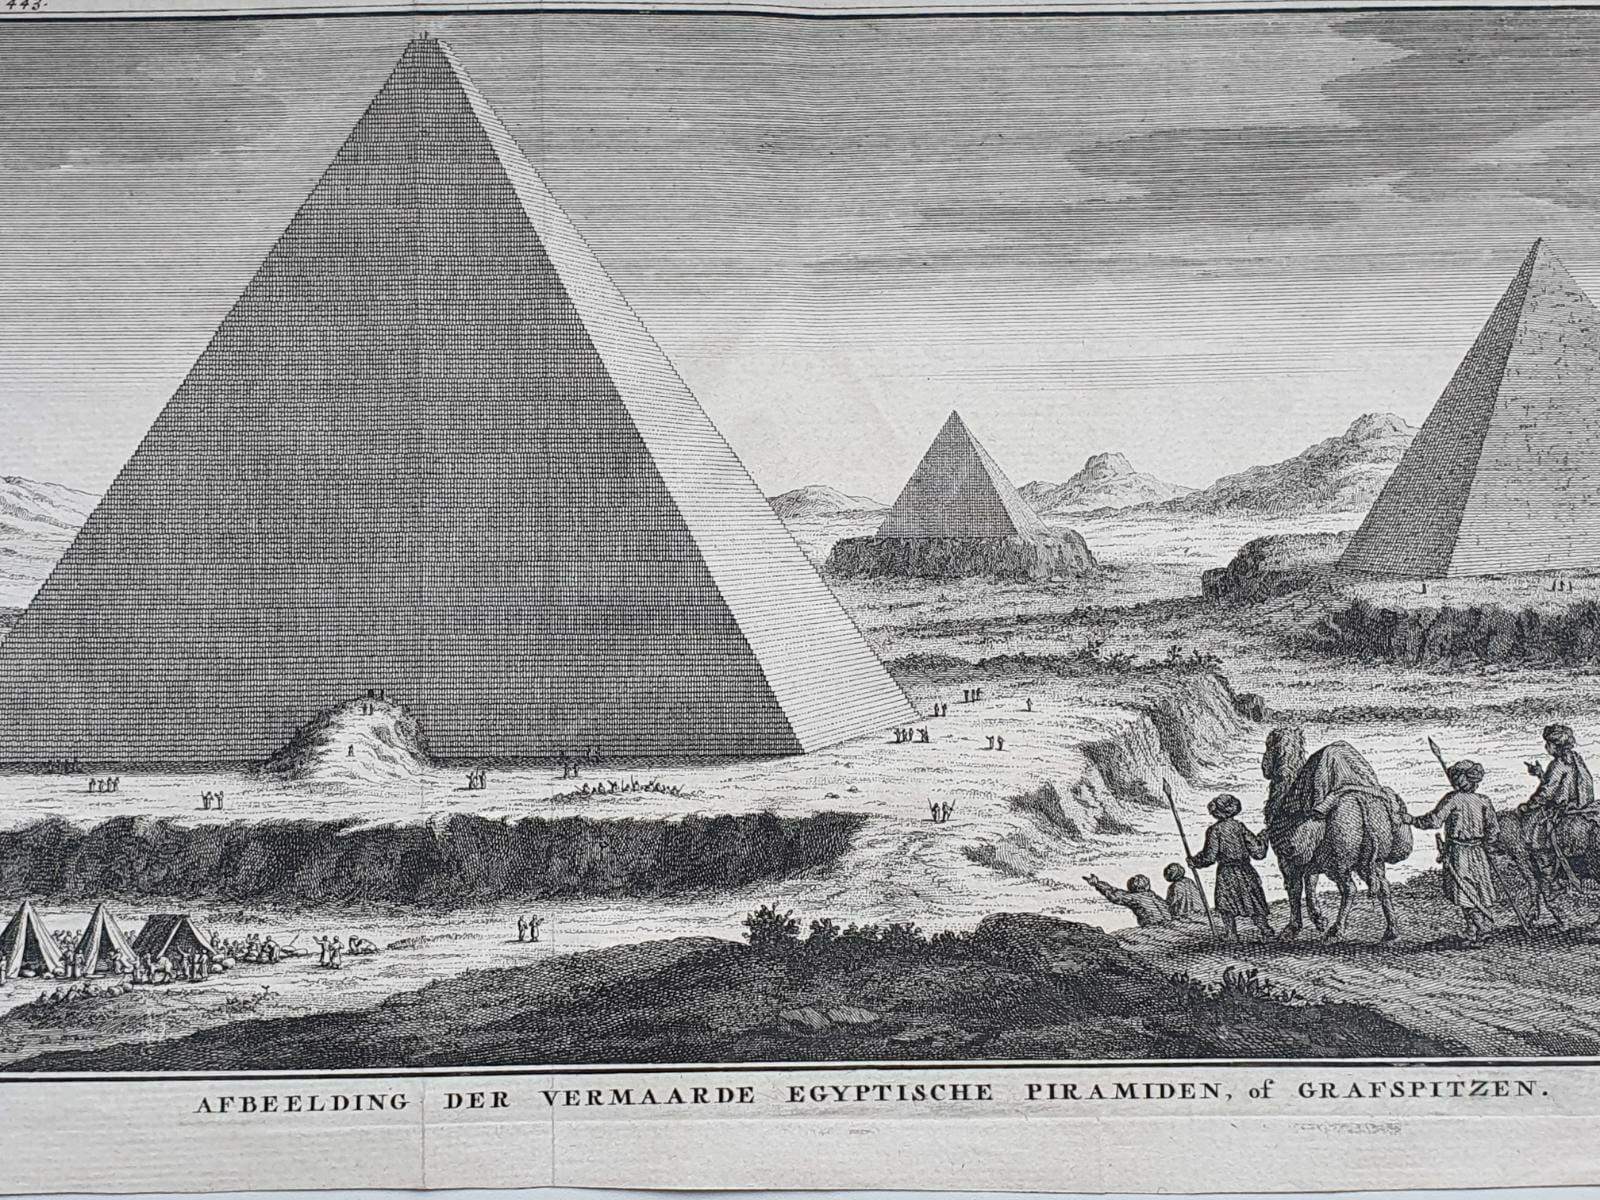 [Antique etching and engraving, ets en gravure, print] J.C. Philips, The Pyramids in Egypt, published 1732-1733.